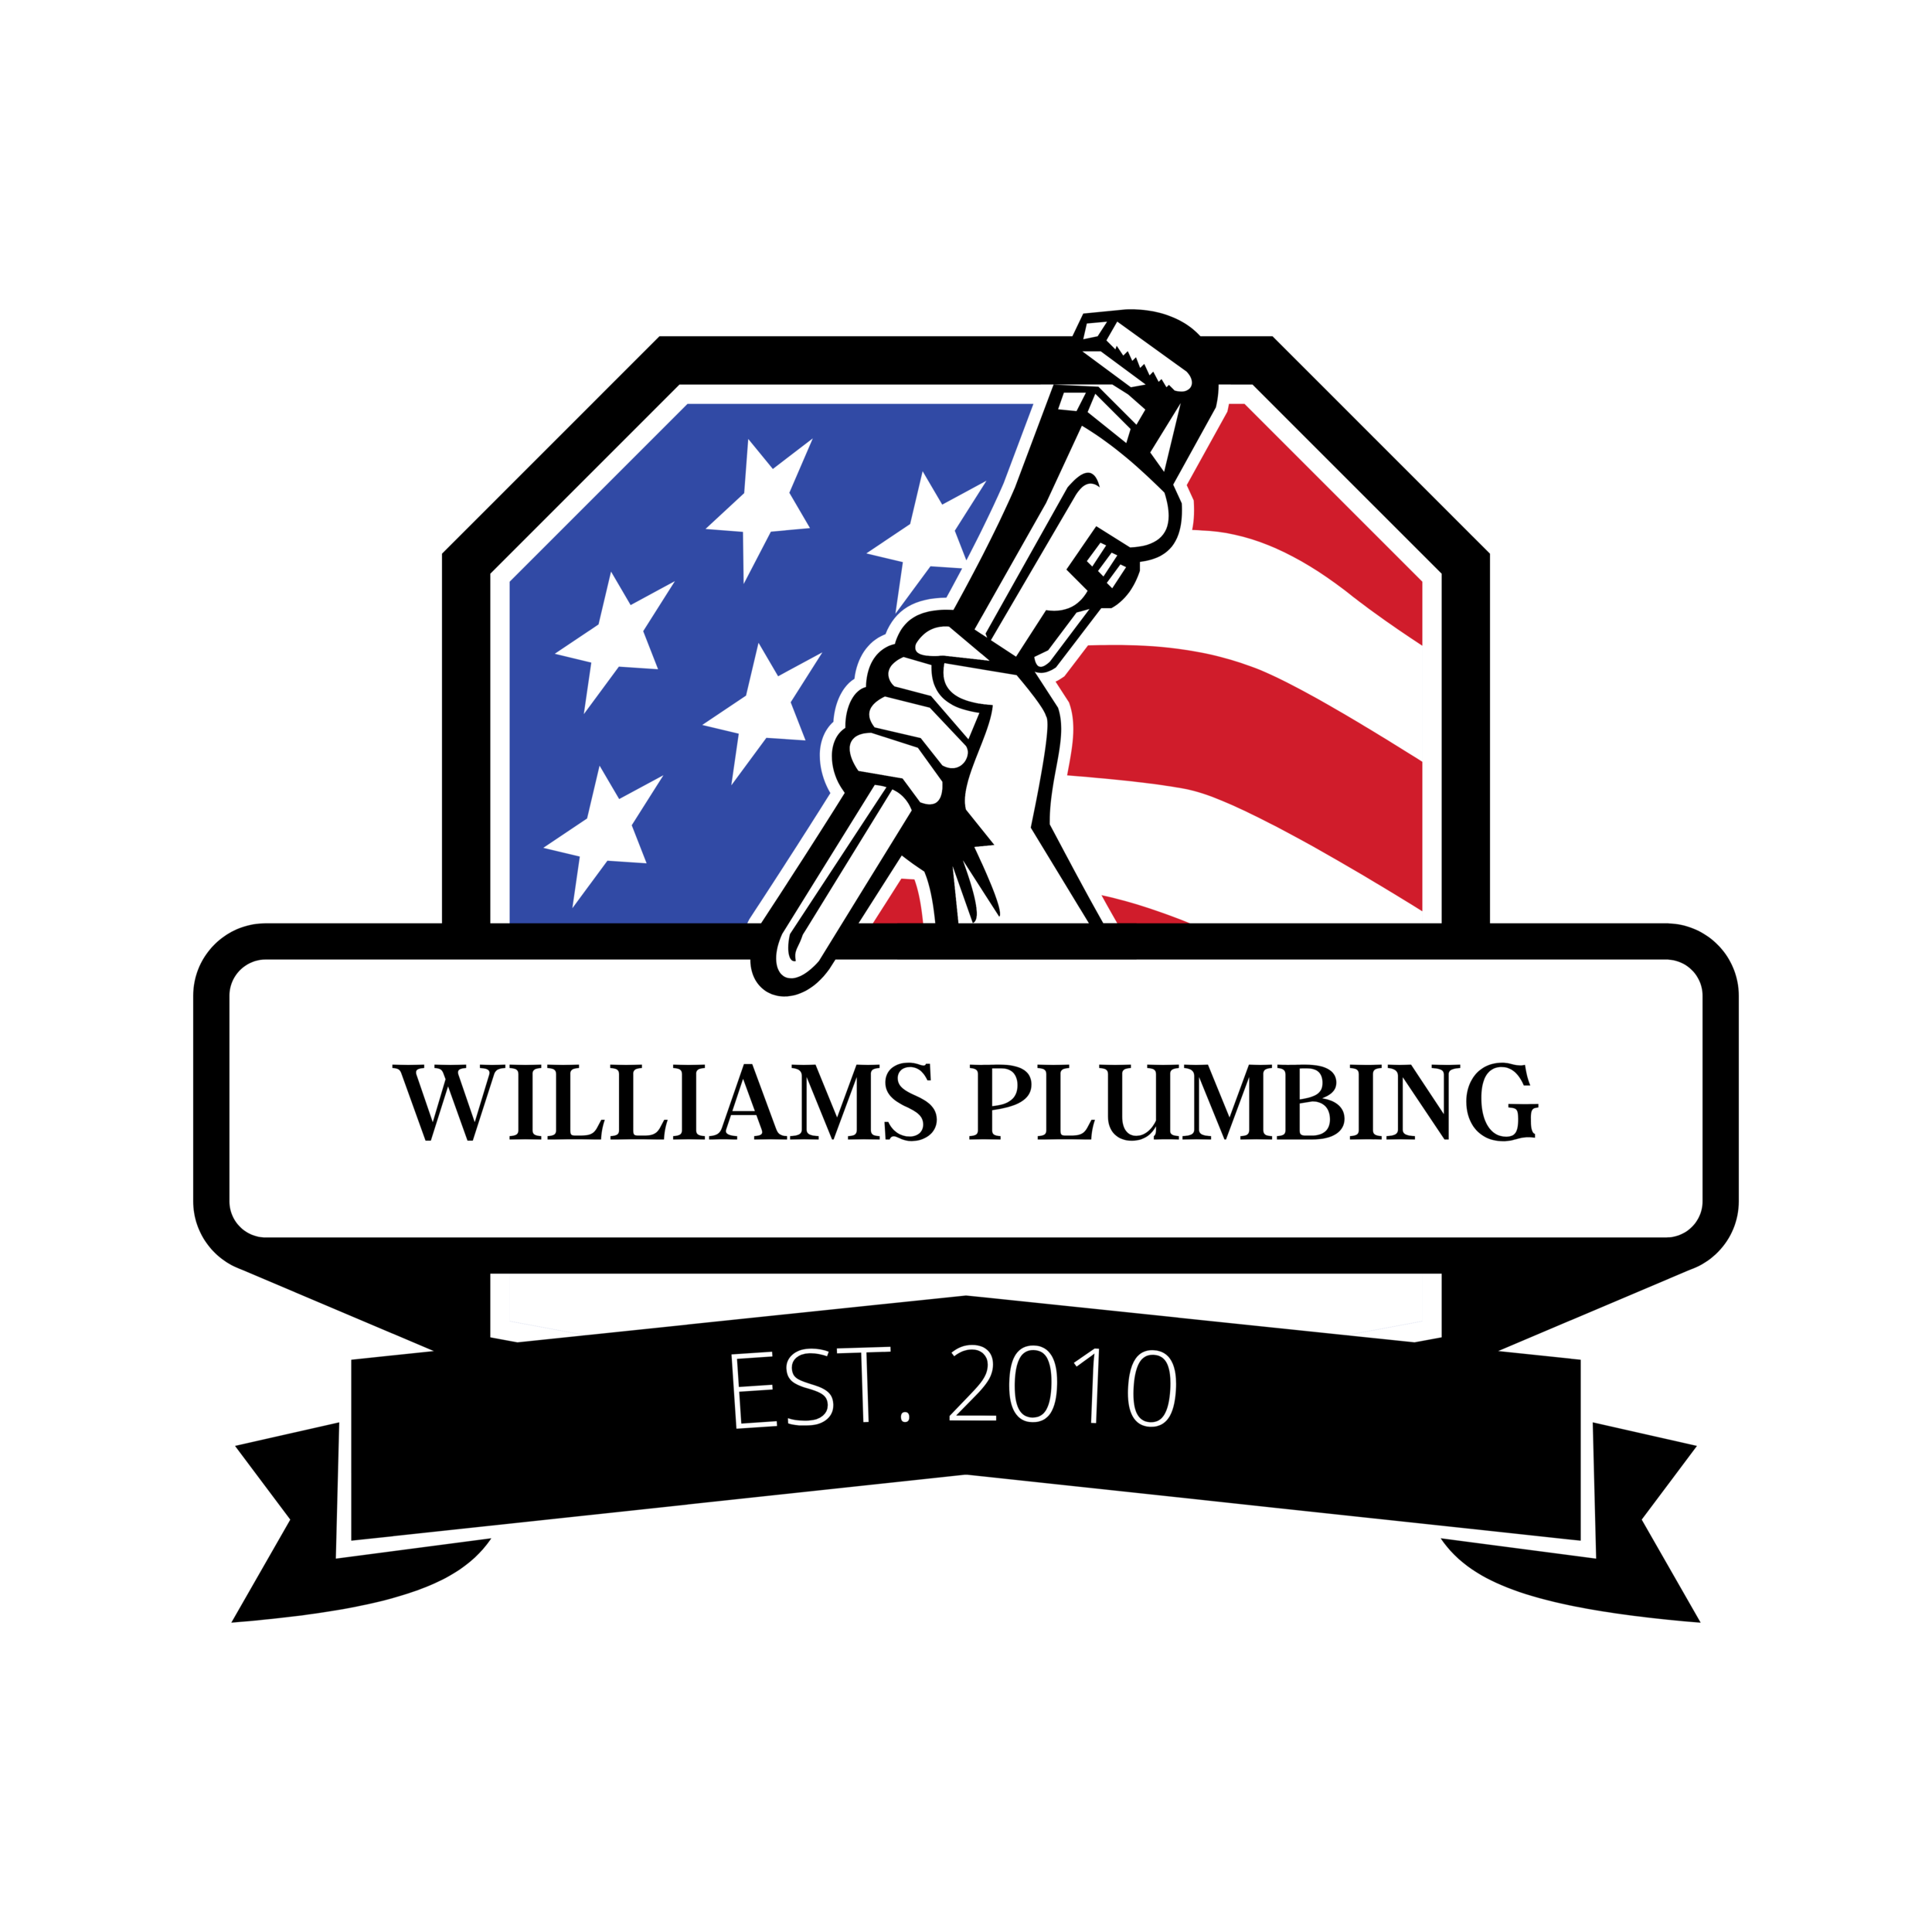 Plumer Holding a Wrench - Plumbing Services Png Illustration 23974953 PNG